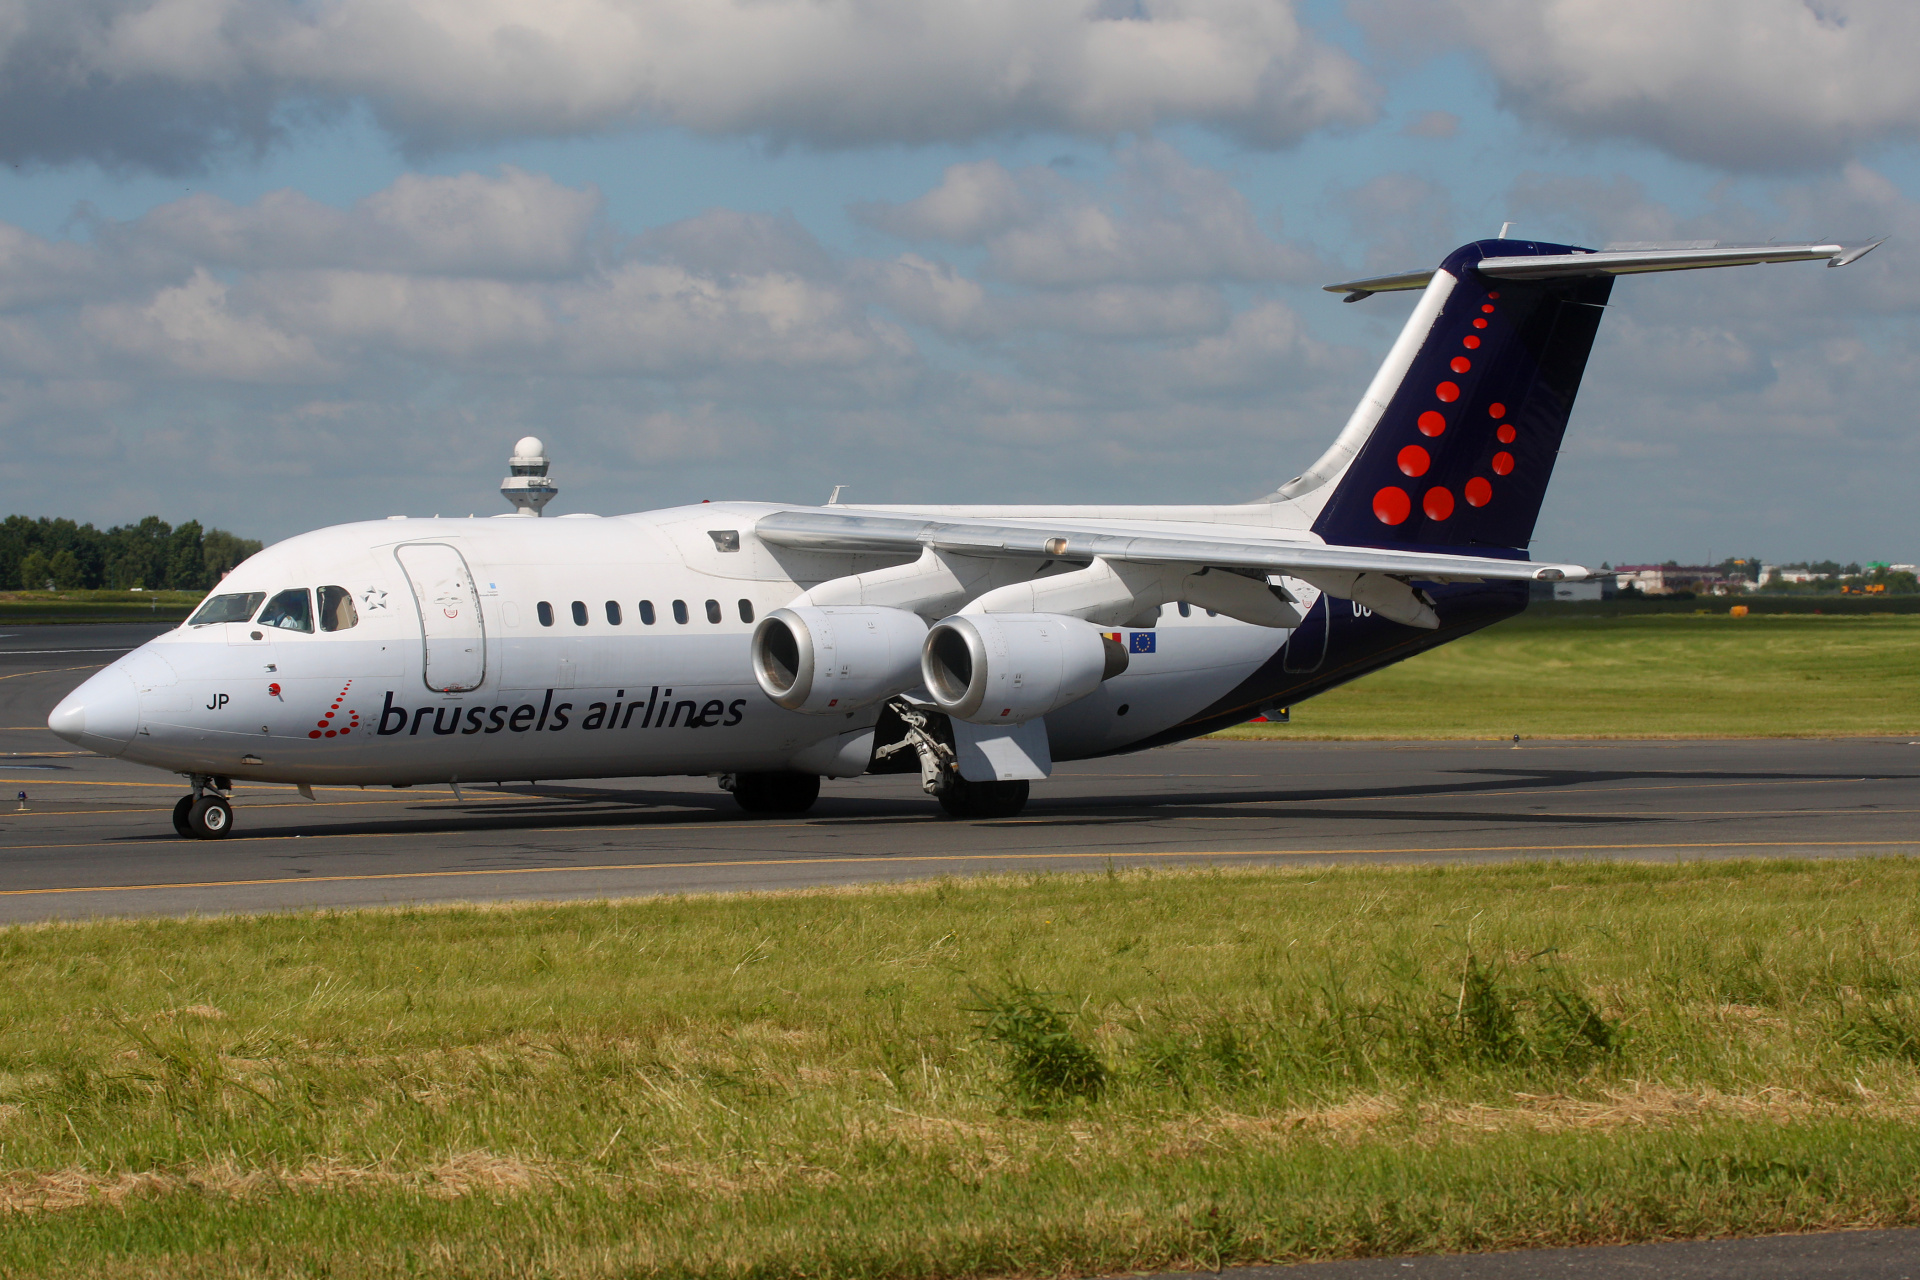 OO-DJP (Aircraft » EPWA Spotting » BAe 146 and revisions » Avro RJ85 » Brussels Airlines)